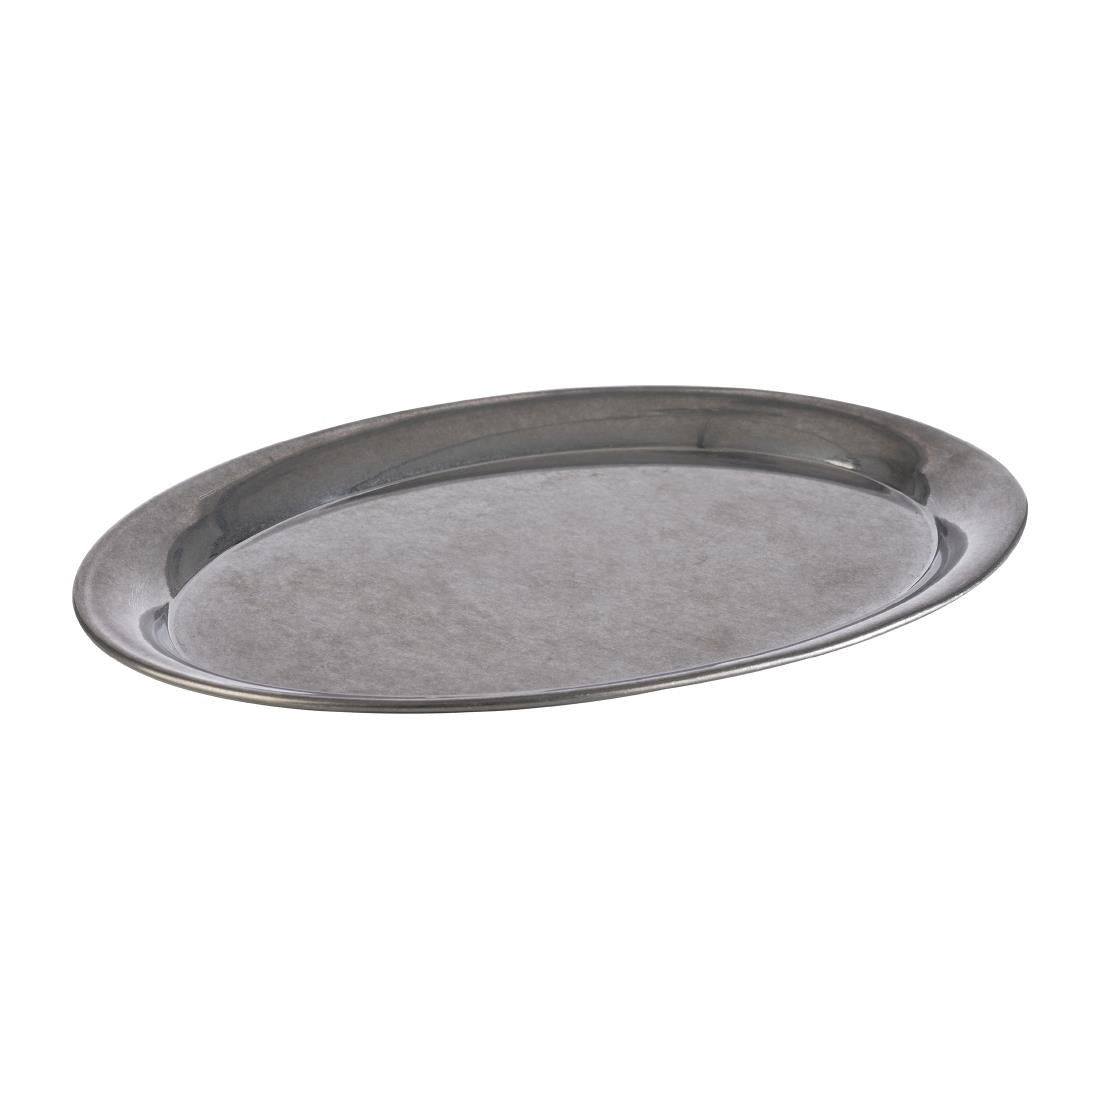 FT172 APS Coffeehouse Vintage Tray 265 x 195mm JD Catering Equipment Solutions Ltd